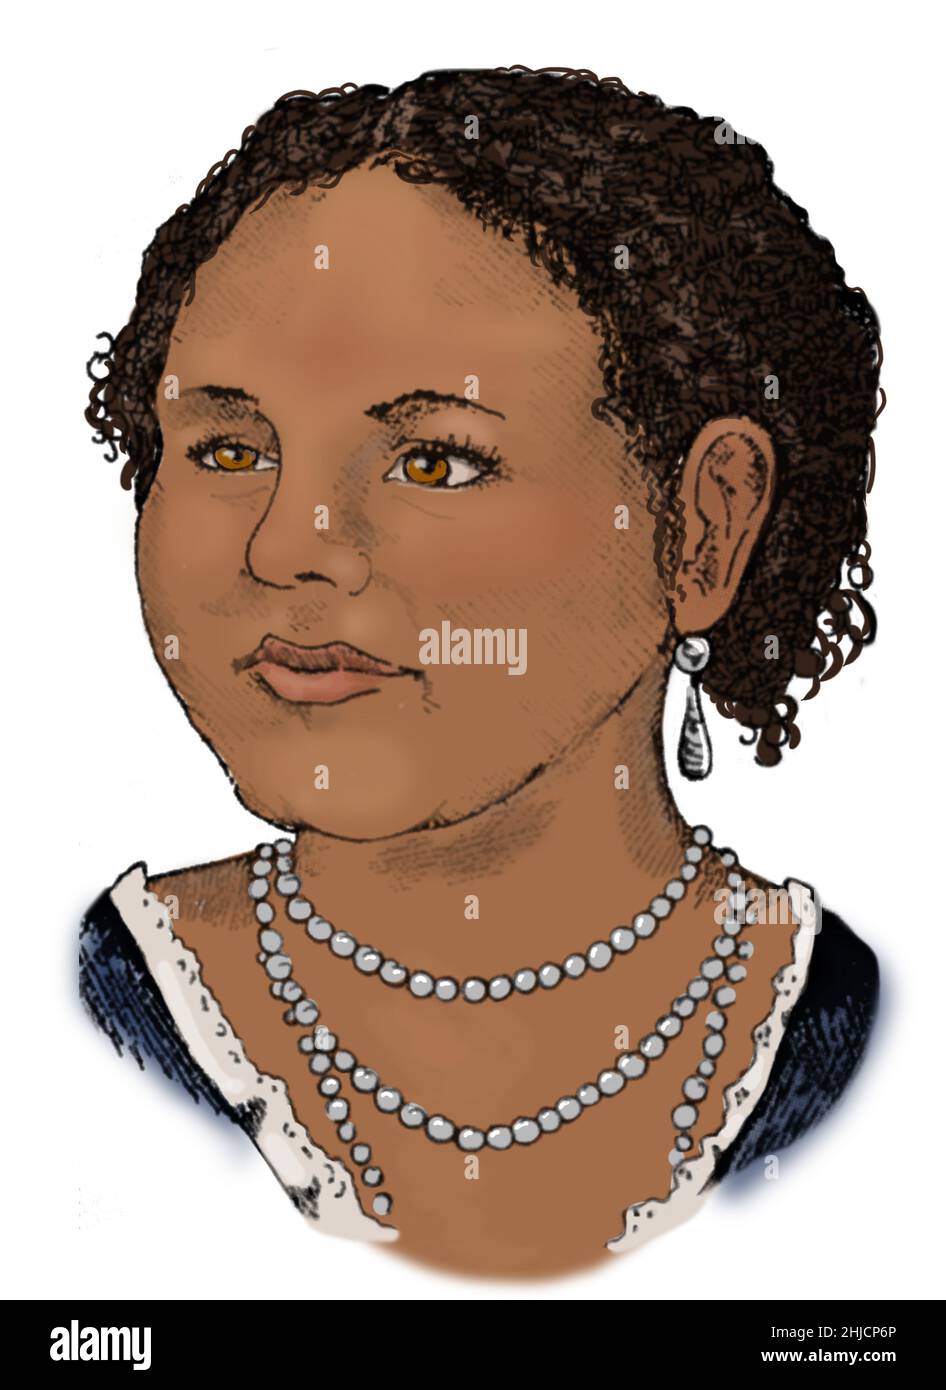 Mary Seacole (1805-1881) was a British-Jamaican businesswoman and nurse. During the Crimean War, she ran a hotel and tended to the wounded. Her autobiography, Wonderful Adventures of Mrs. Seacole in Many Lands (1857), is one of the earliest autobiographies of a mixed-race woman. In 2004 she was voted the greatest black Briton. Colorized. Stock Photo